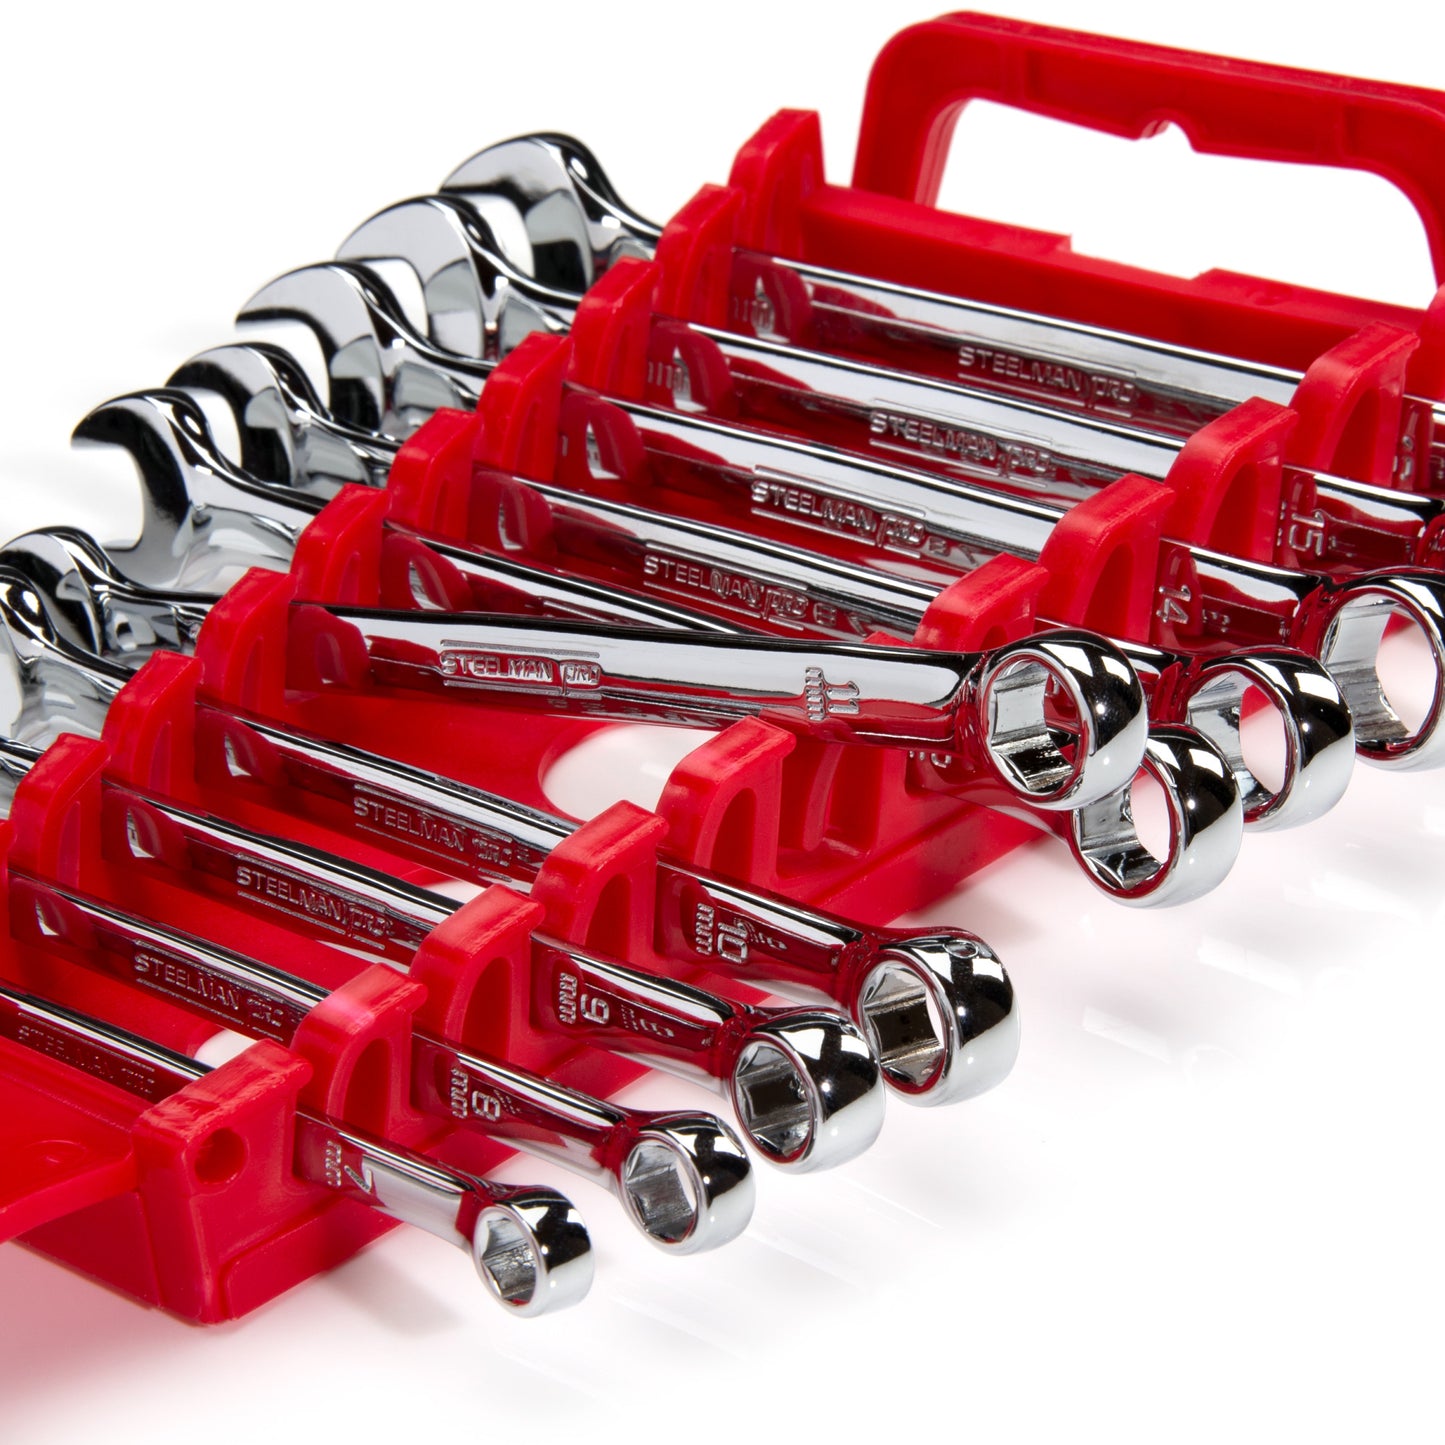 Universal 10-Tool Wrench Holder, Red